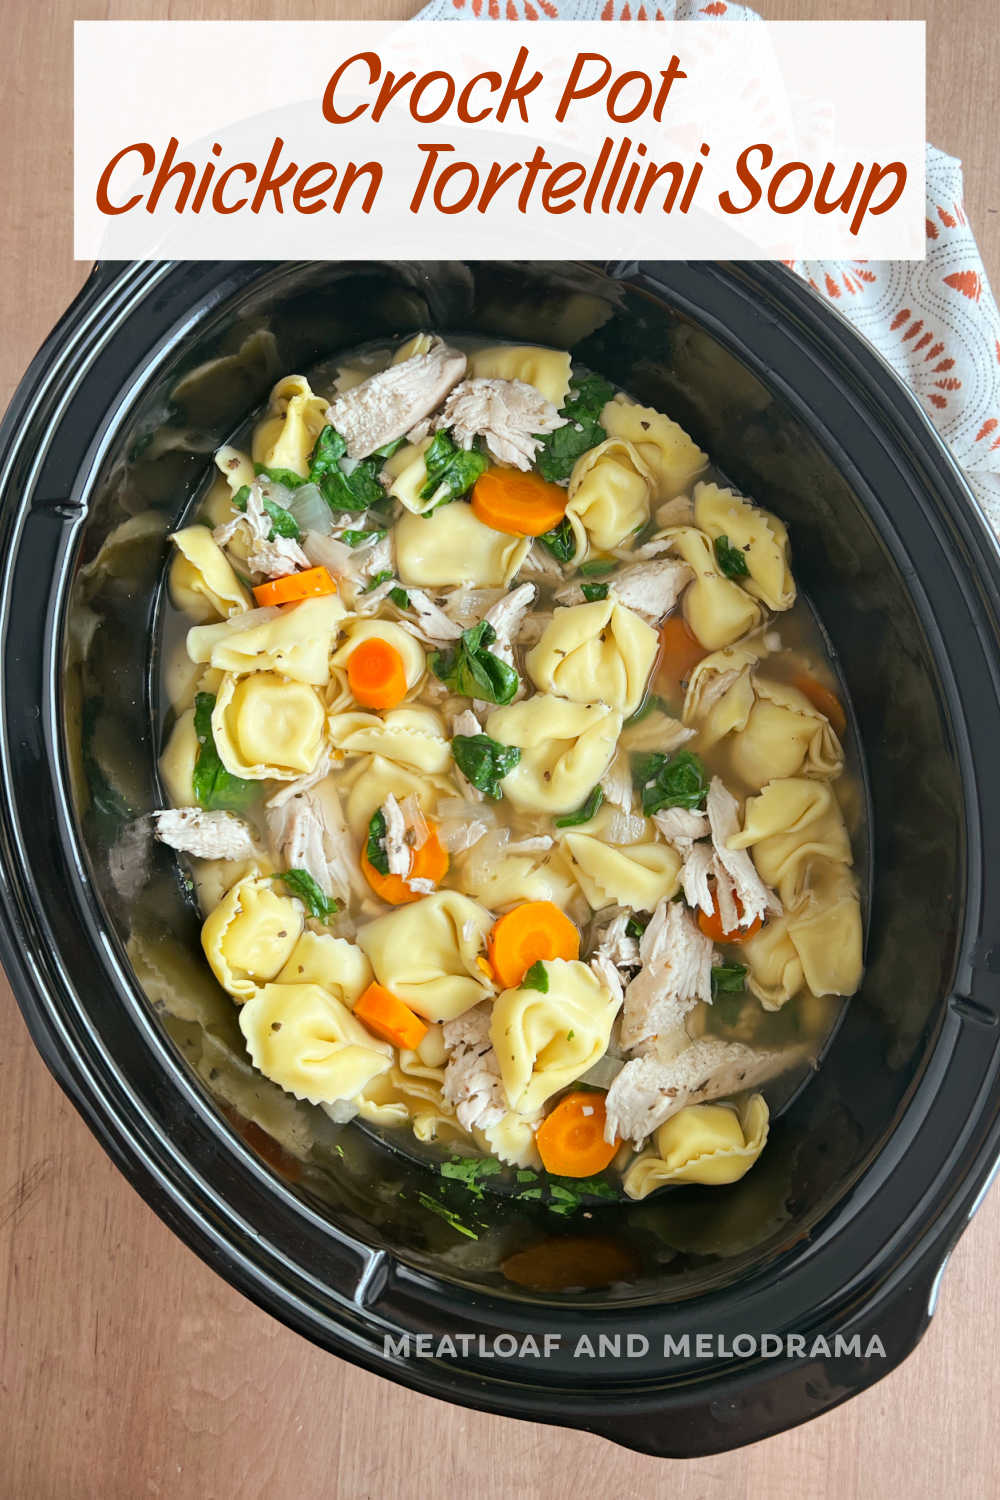 Crock Pot Chicken Tortellini Soup is an easy slow cooker soup recipe with tender chicken, cheesy tortellini and fresh vegetables. The whole family will love this delicious chicken soup! via @meamel